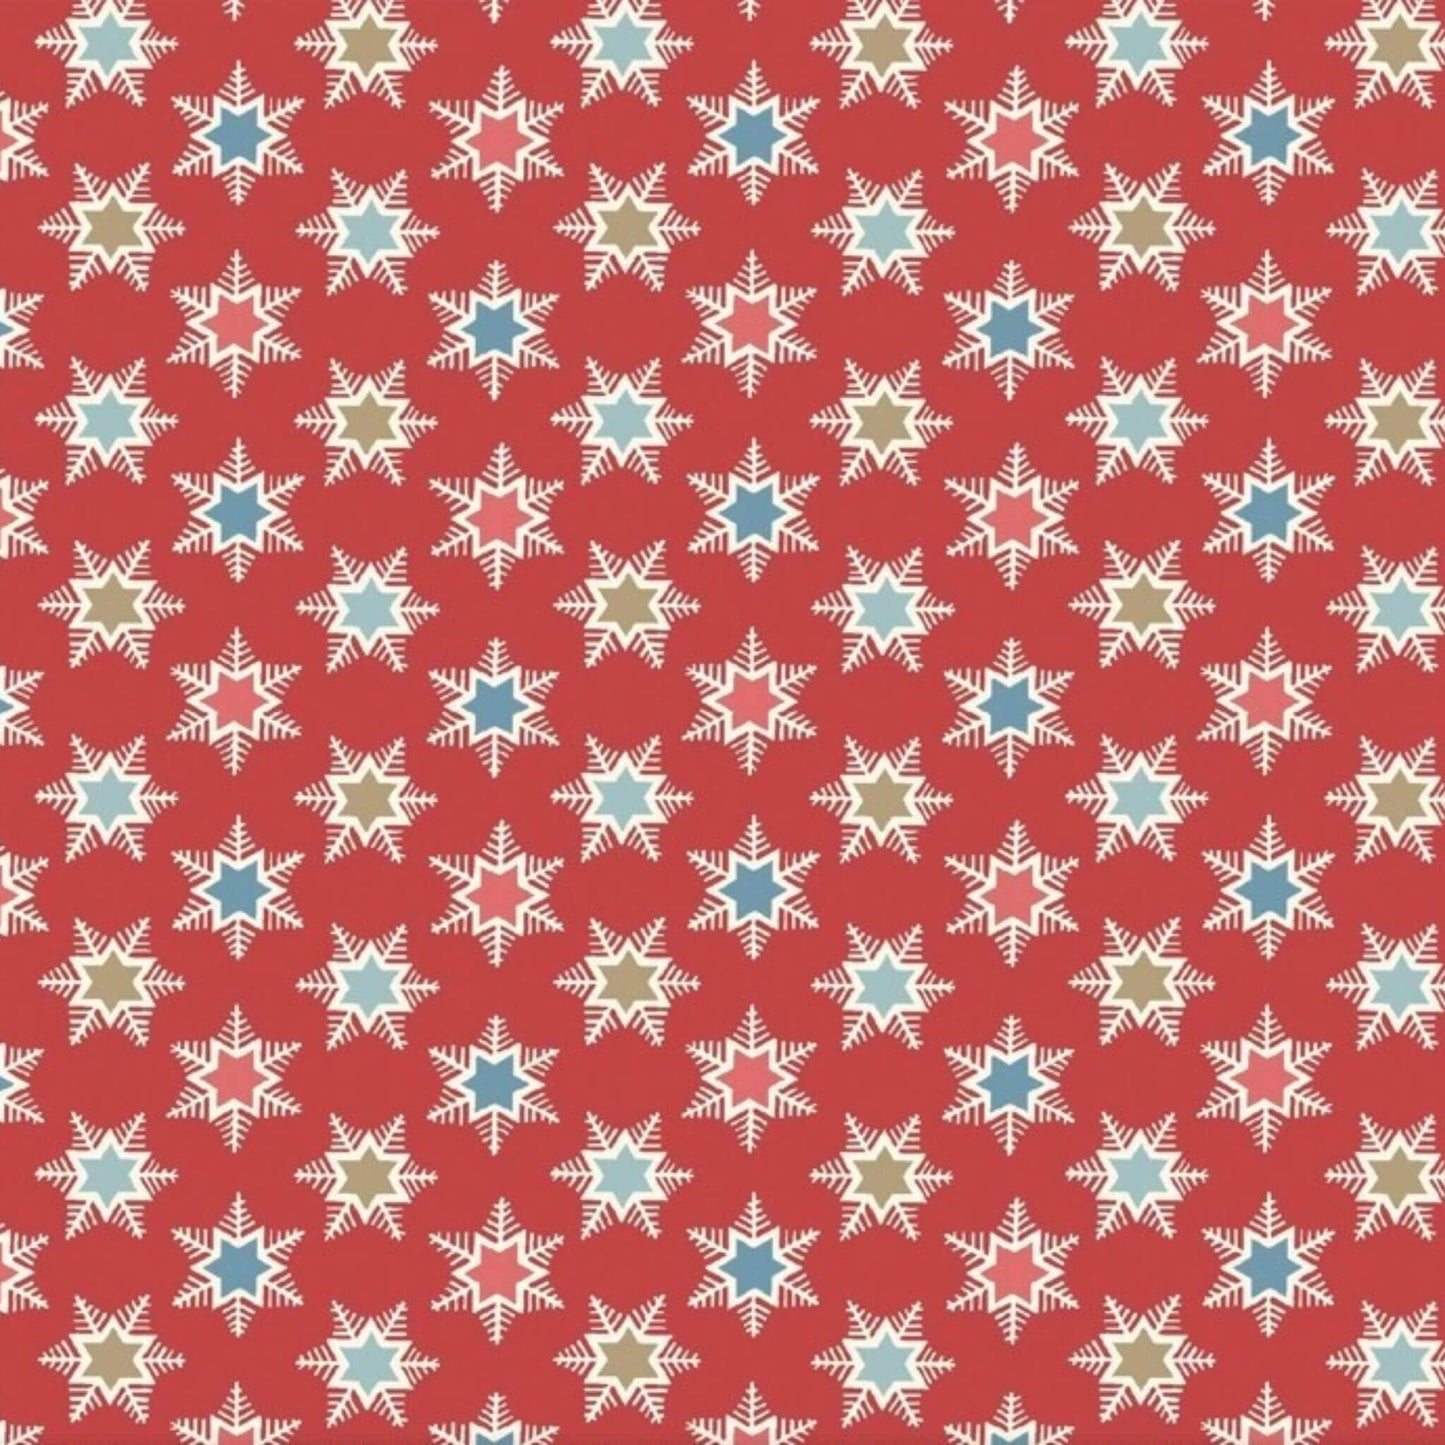 Forest Star - A Woodland Christmas Fabric Range - Liberty Fabrics - Red with Gold Metallic